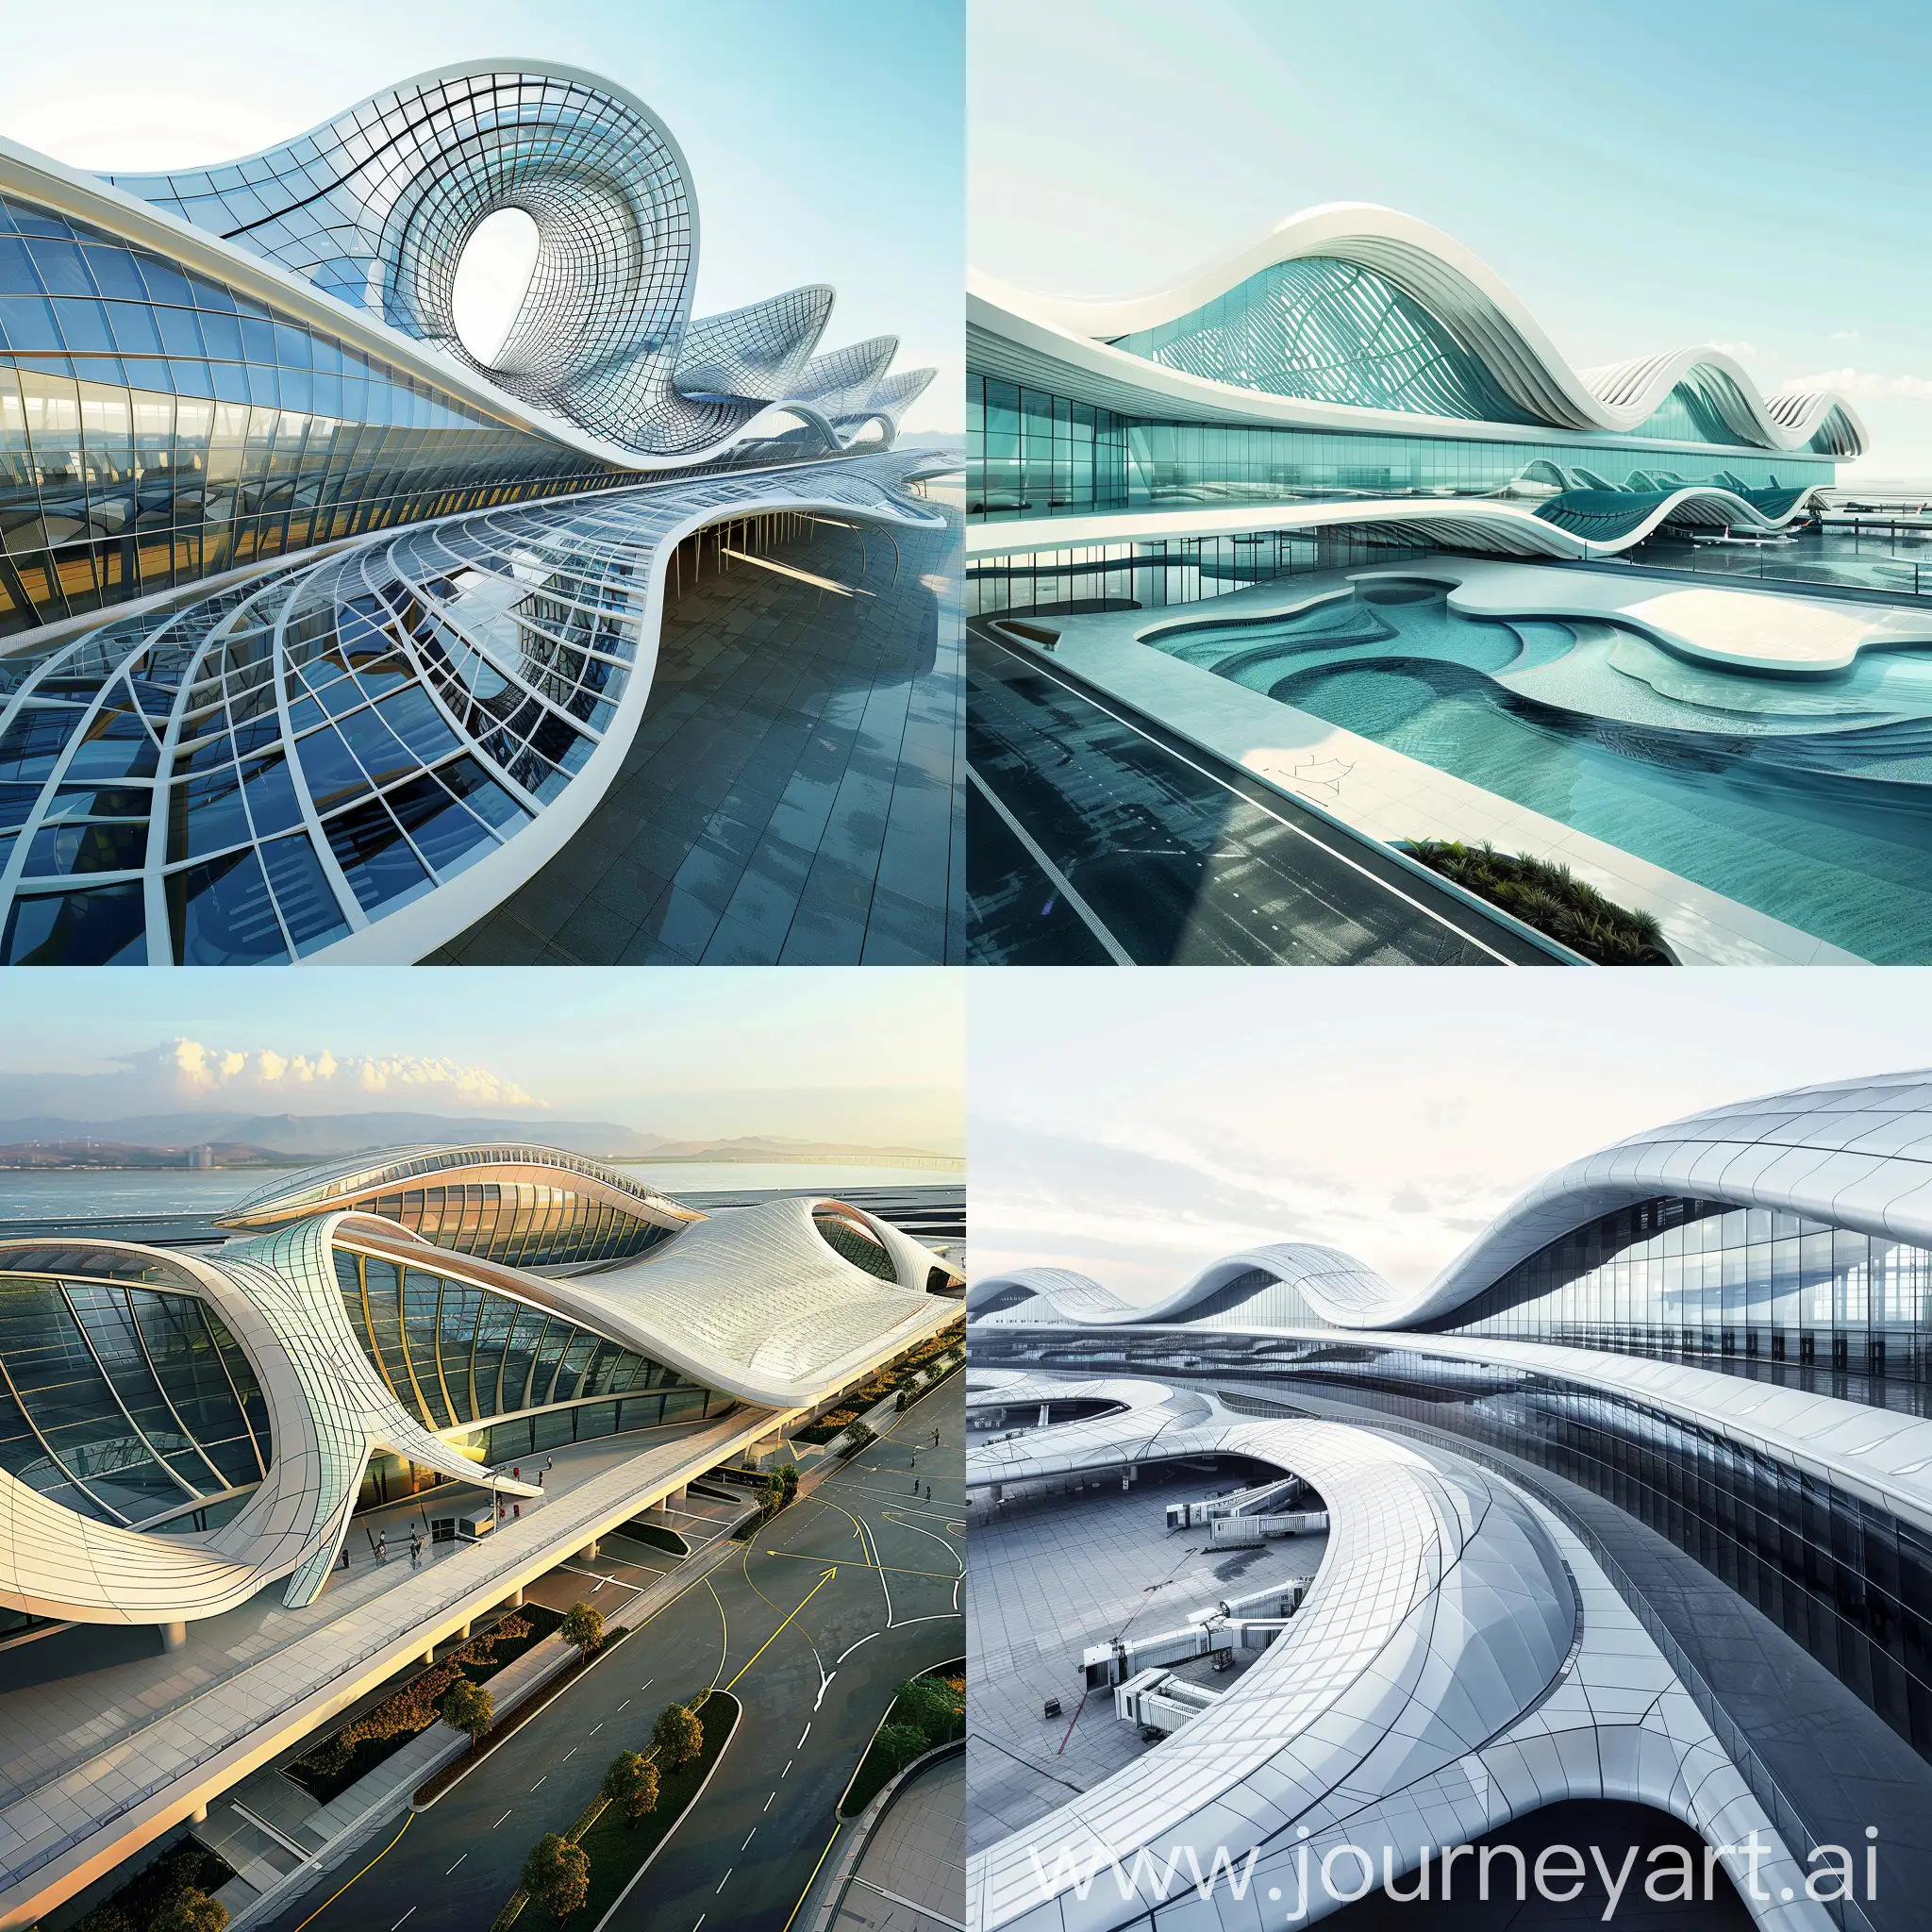 Behold the modern marvel of an international airport terminal, its parametric style architecture resembling the fluidity of ocean waves from a bird's eye view.